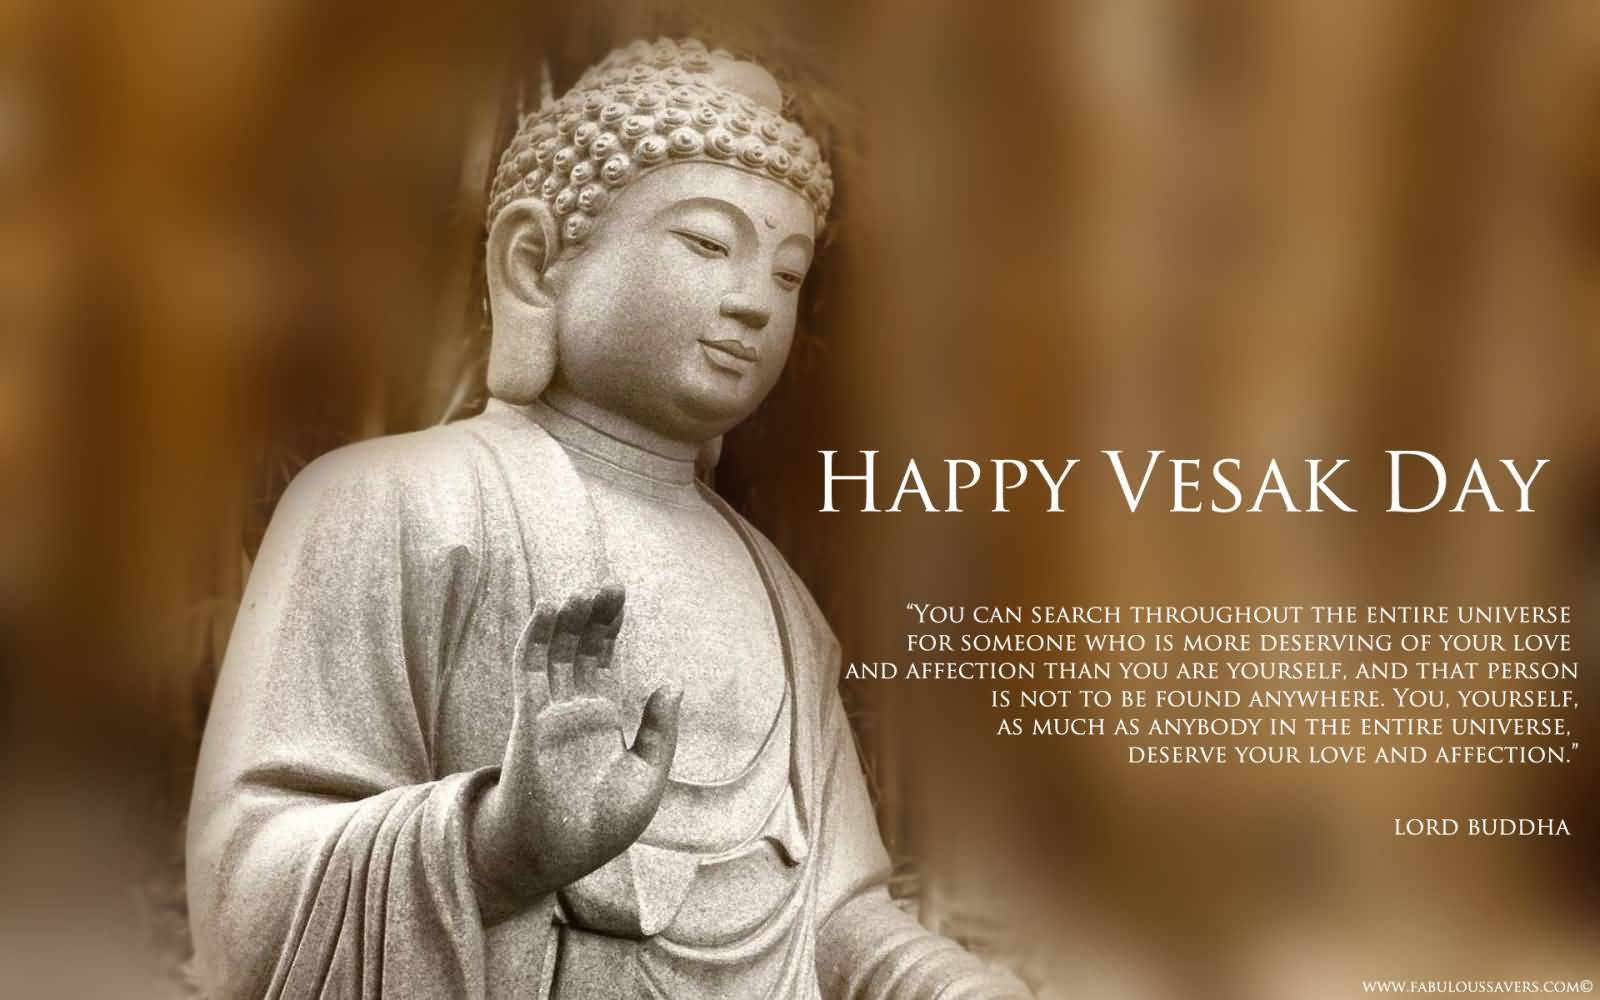 Happy Vesak Day 2019 Quotes, Wishes, Status, Messages, Greetings